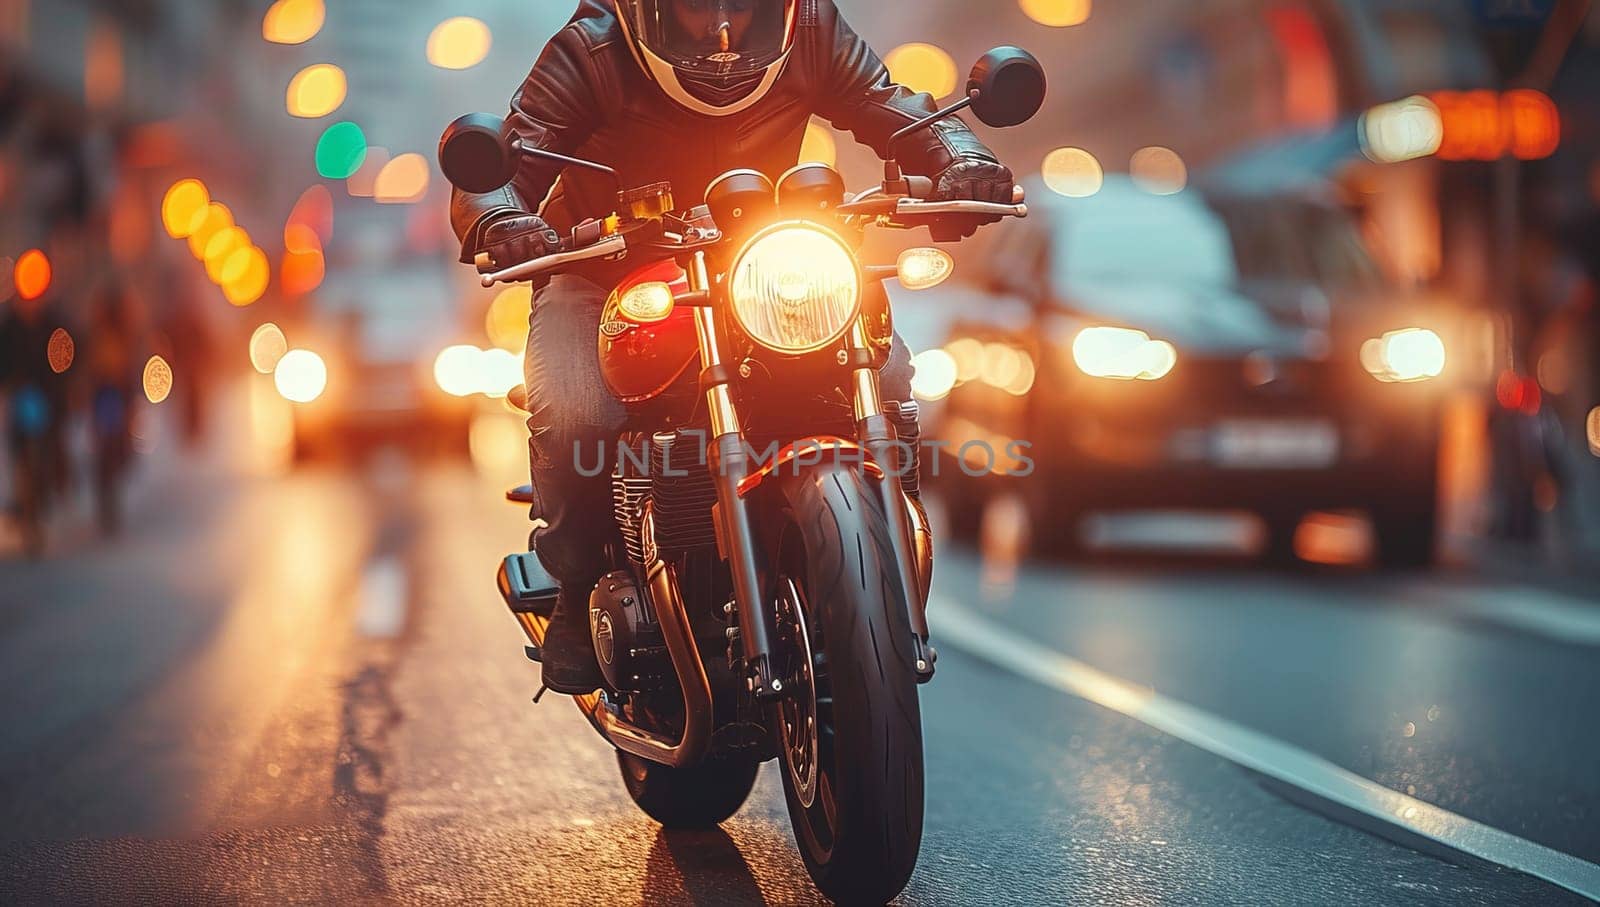 Motorcycle rider on the road in the evening. Biker on a motorcycle.